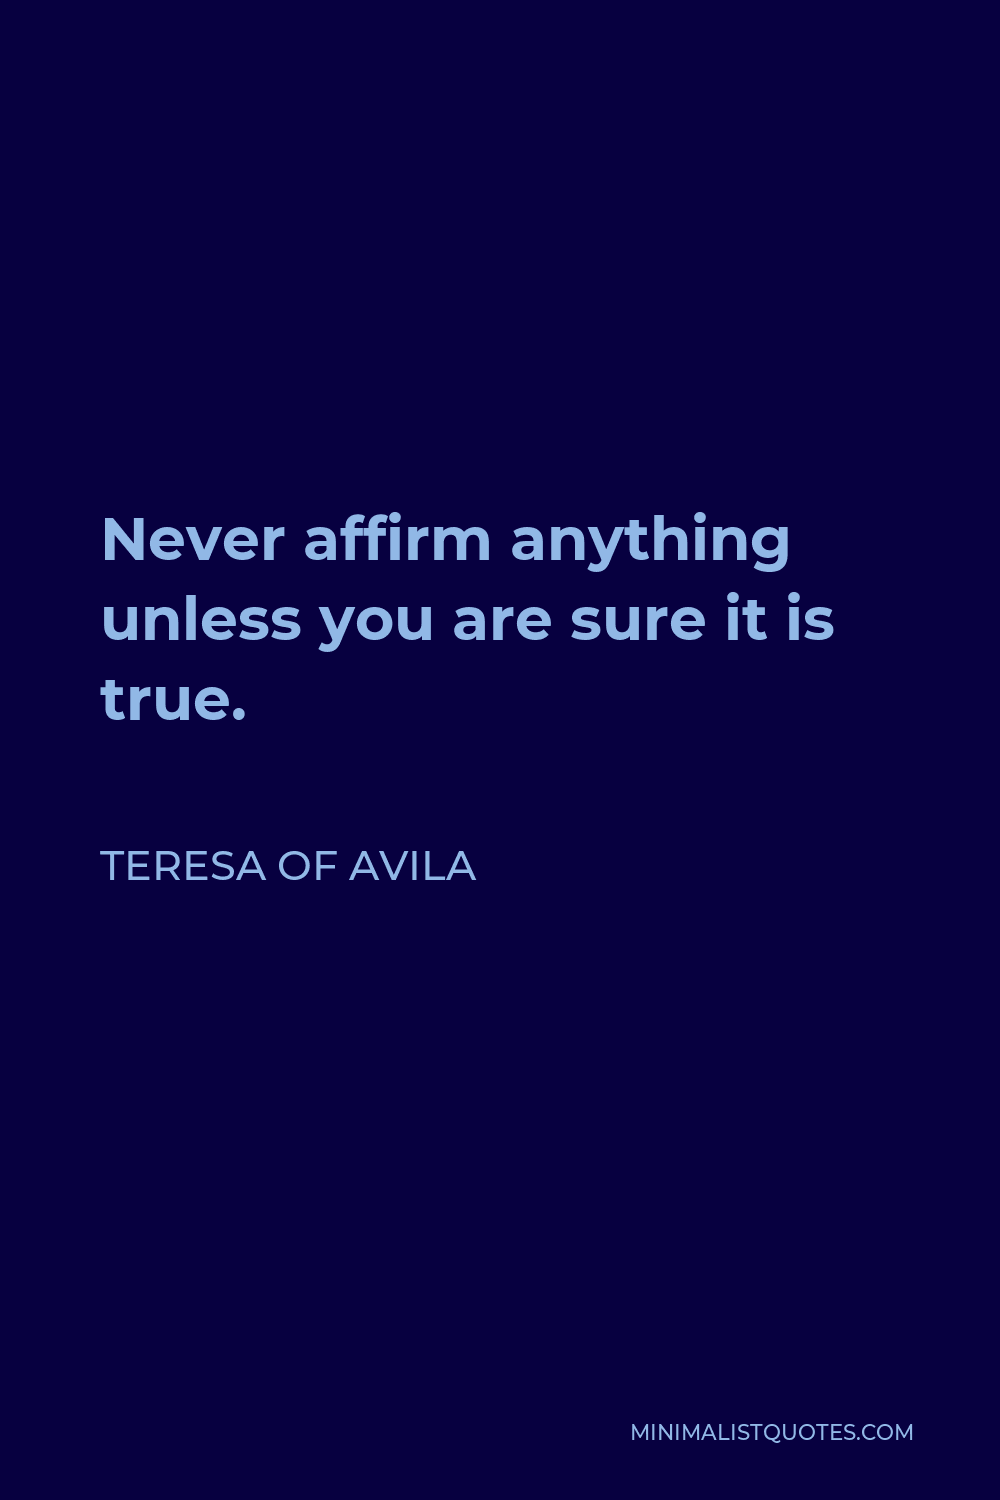 Teresa of Avila Quote - Never affirm anything unless you are sure it is true.